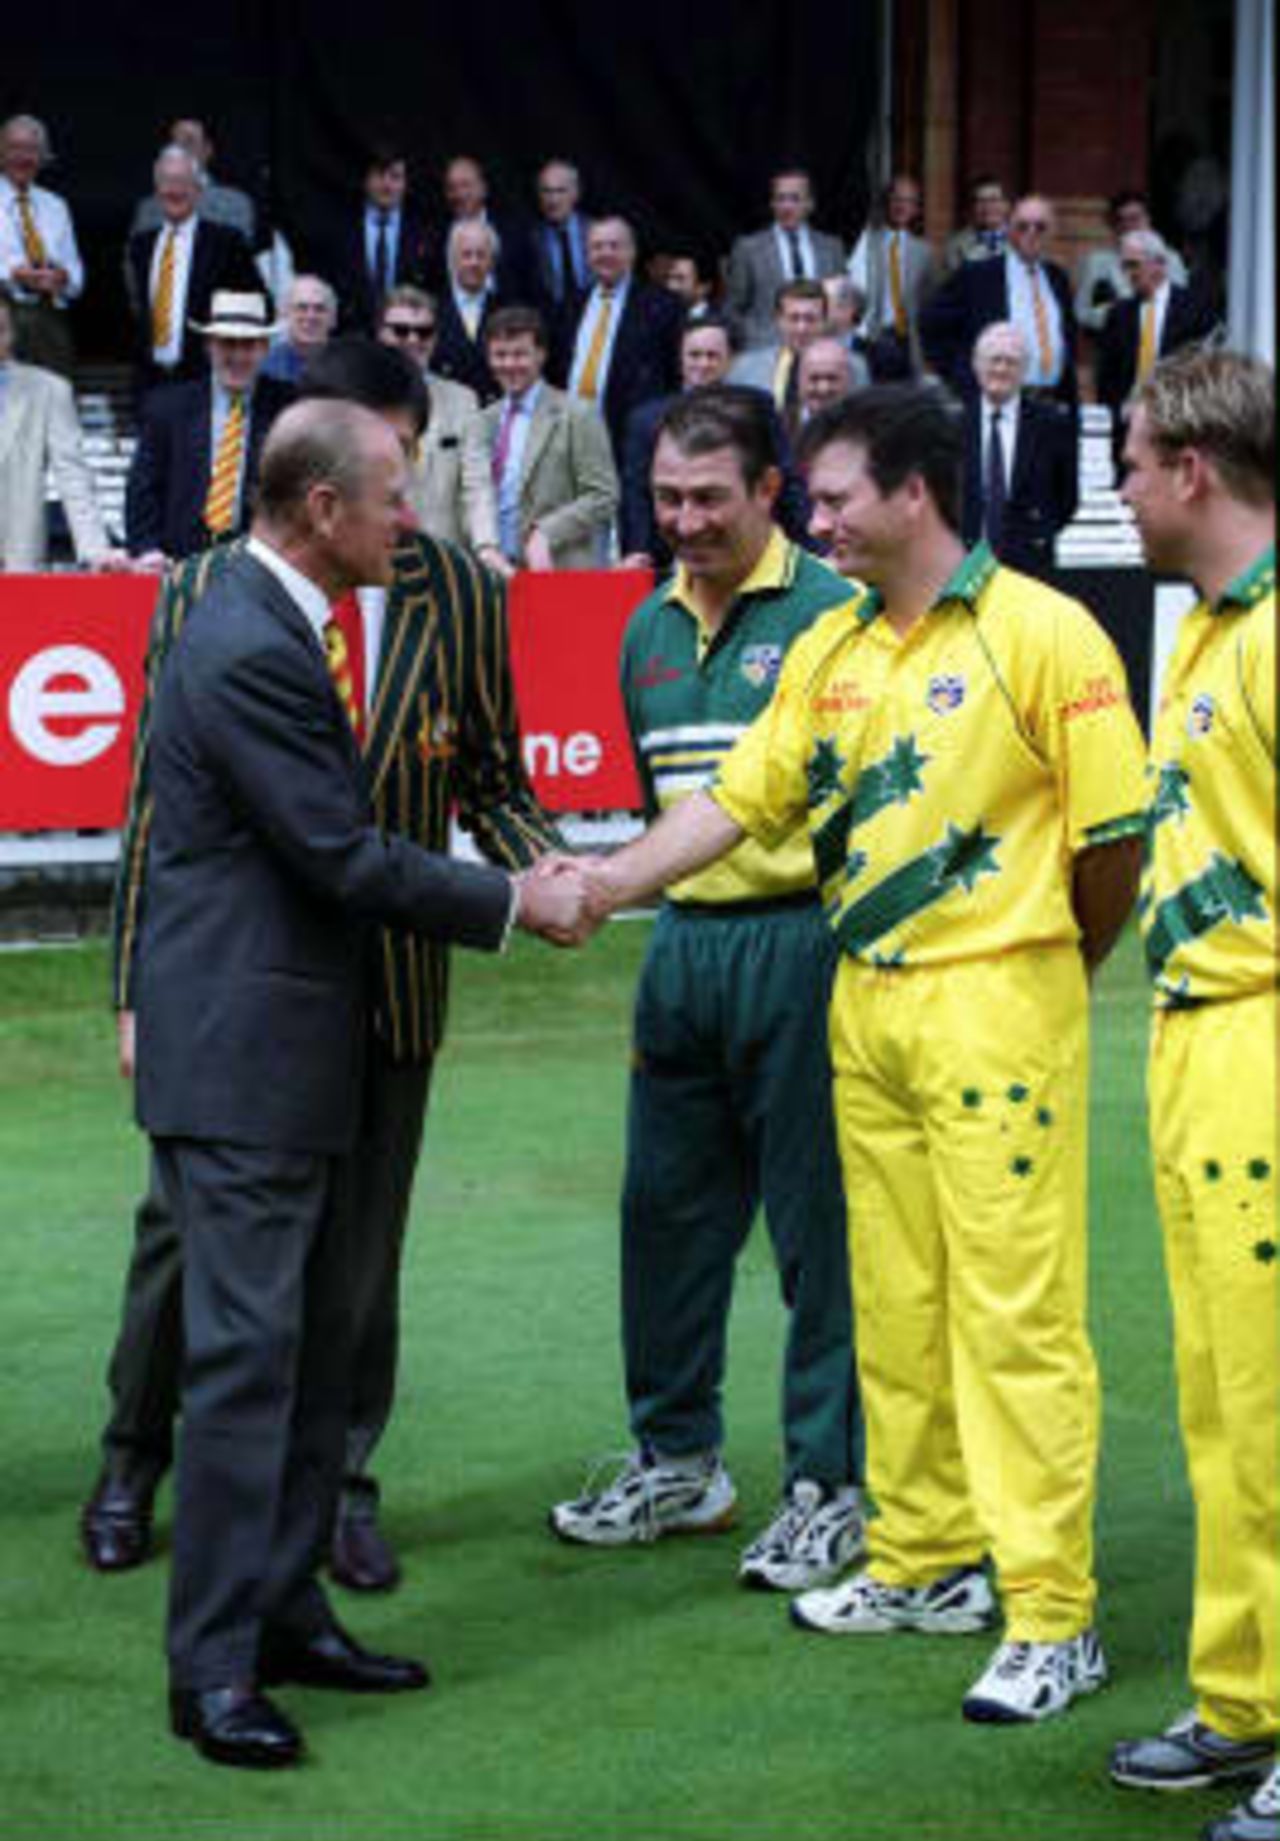 Prince Philip (Left), the Duke of Edinburgh, is introduced to the Australian cricket World Cup side captain Steve Waugh before the World Cup final against Pakistan at Lords as Australian coach Jeff Marsh (Center) and Shane Warne (Right) look, 20 June 1999.